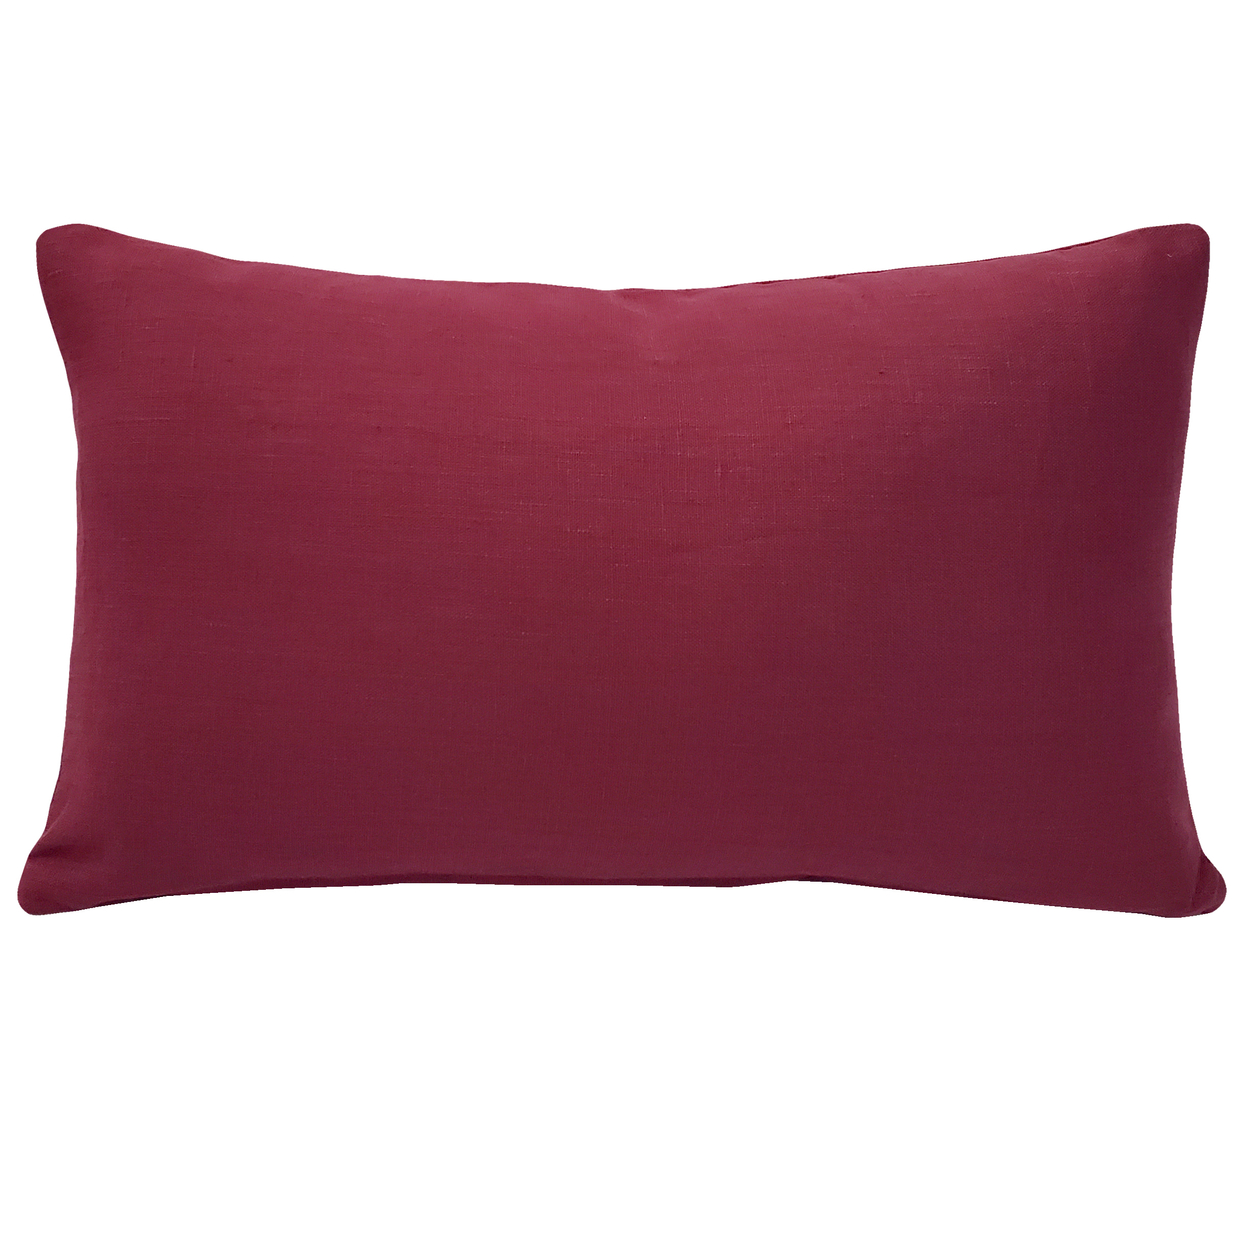 Tuscany Linen Wine Throw Pillow 12x19, With Polyfill Insert